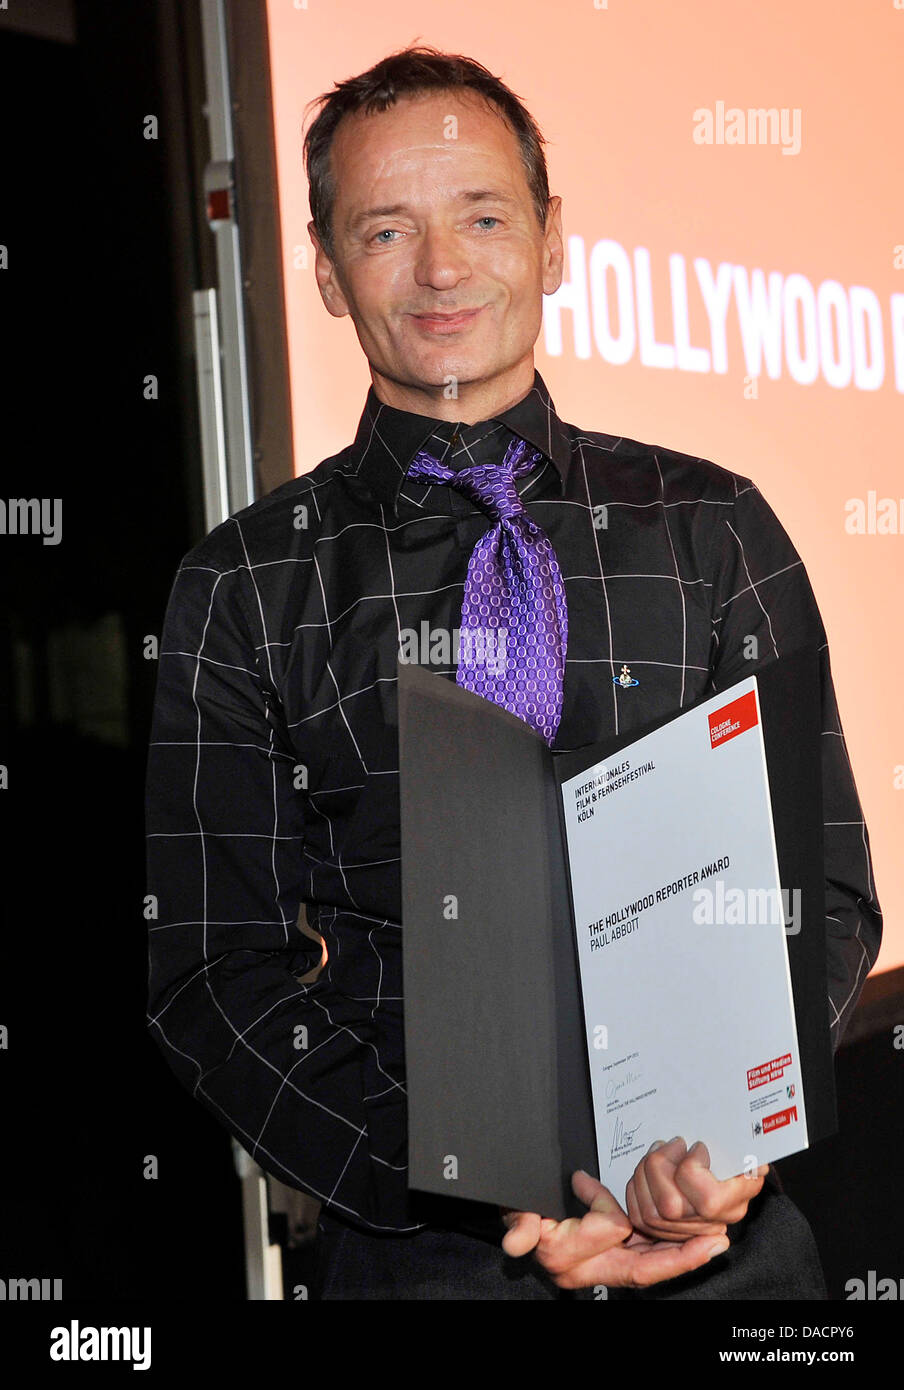 Writer  Paul Abbott, honoured with the 'Hollywood Reporter Awards', poses during the awarding at the end of the 'Cologne Conference 2011' in Cologne, Germany, 30 September 2011. On the last day of the film and television festival, the 'German Casting Prize 2011', the 'Hollywood Reporter Award', the 'TV Spielfilm Prize' and the 'Film prize Cologne' was awarded. Photo: Henning Kaiser Stock Photo